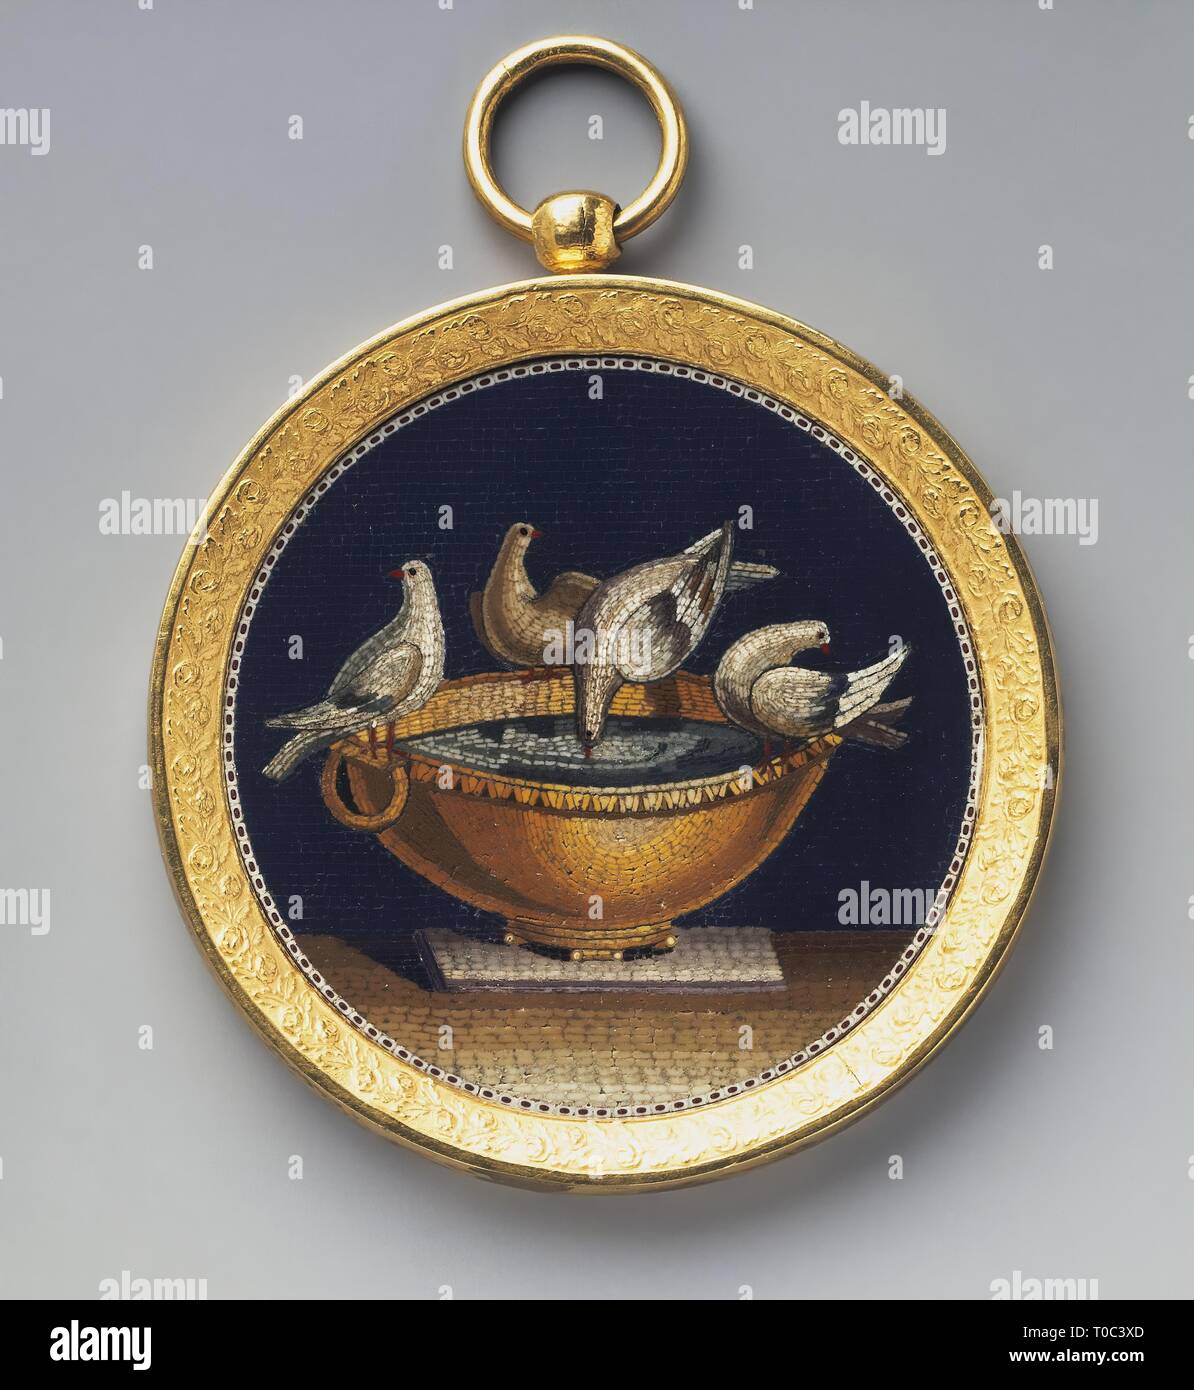 'Miniature: 'Pliny's Pigeons''. Italy, Late 18th - early 19th century. Dimensions: diam. 8 cm. Museum: State Hermitage, St. Petersburg. Stock Photo